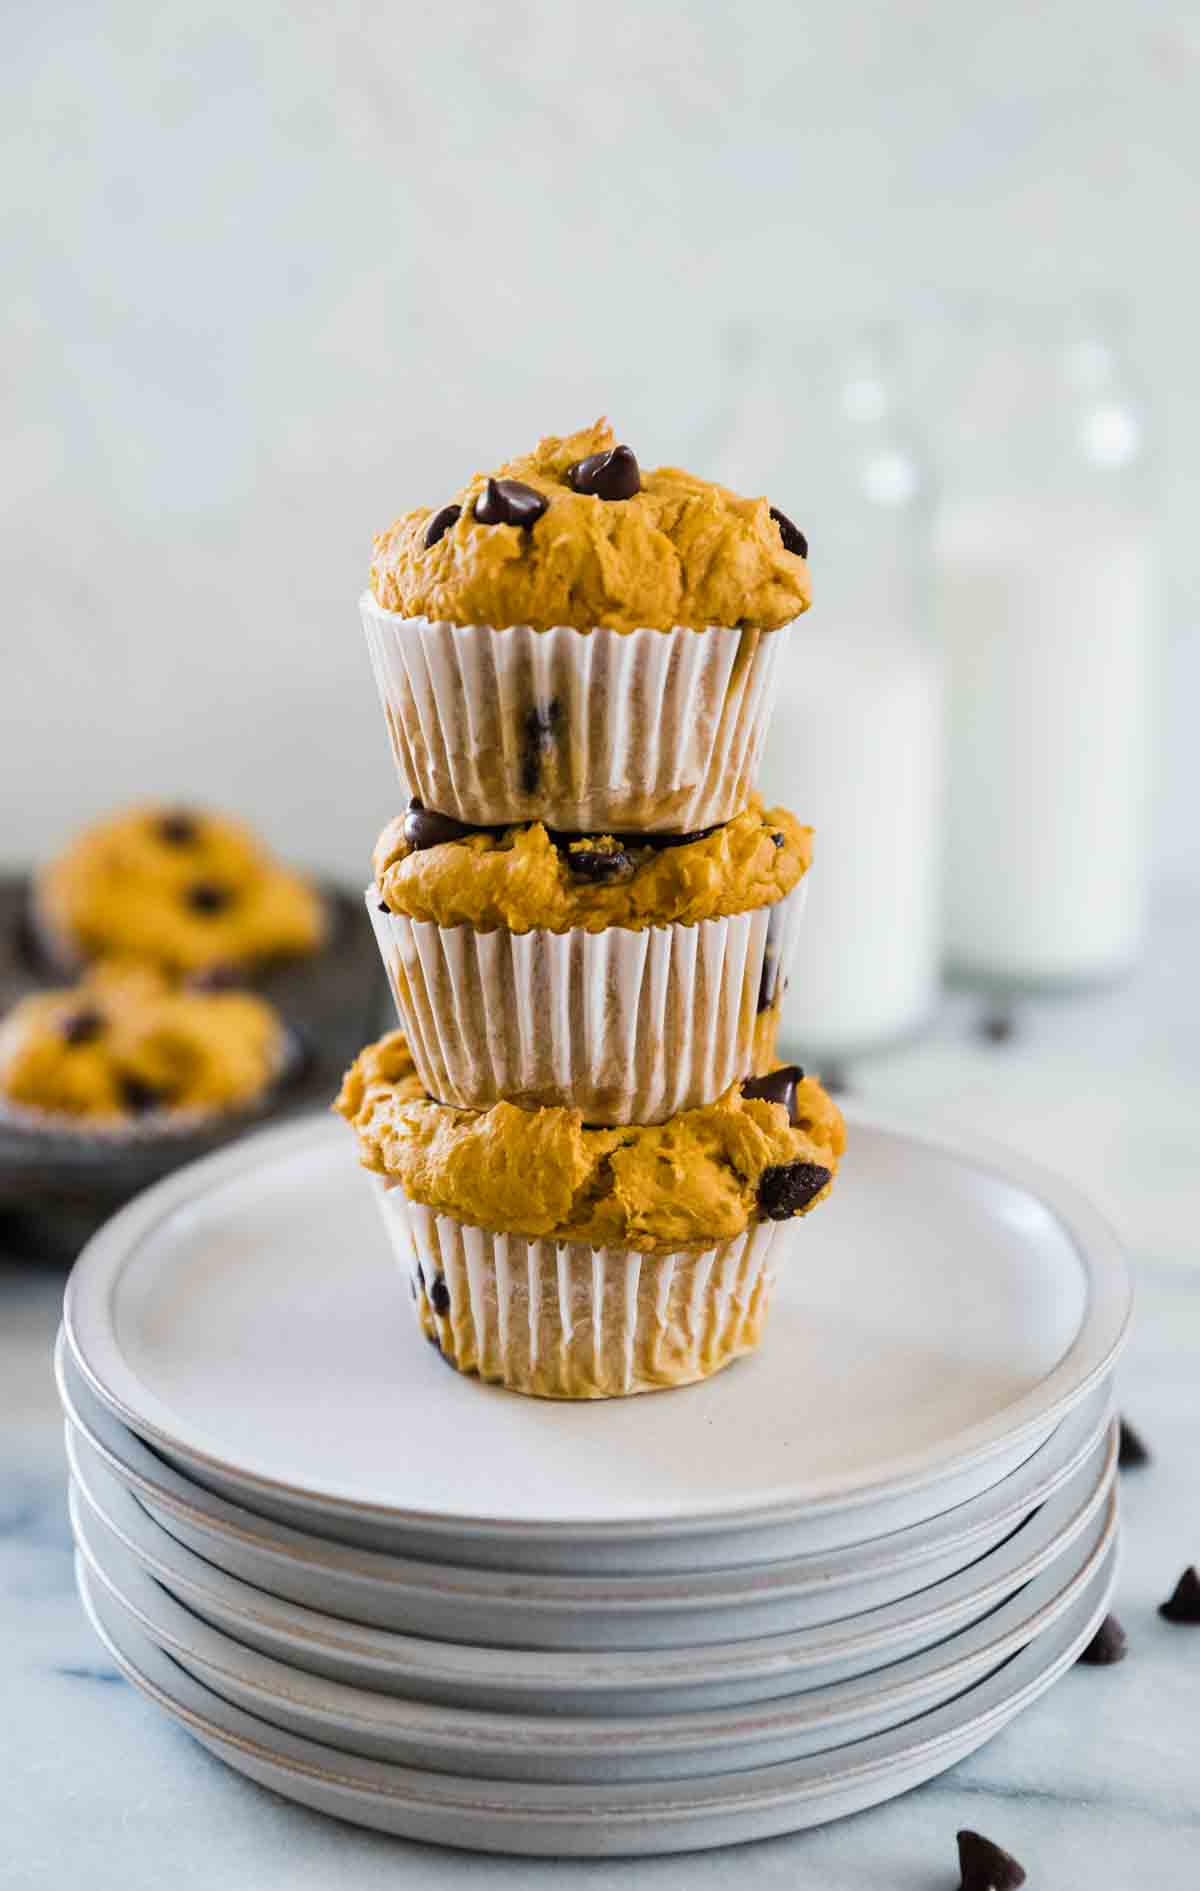 Three cake mix muffins stacked on a plate. There are glasses of milk in the background.